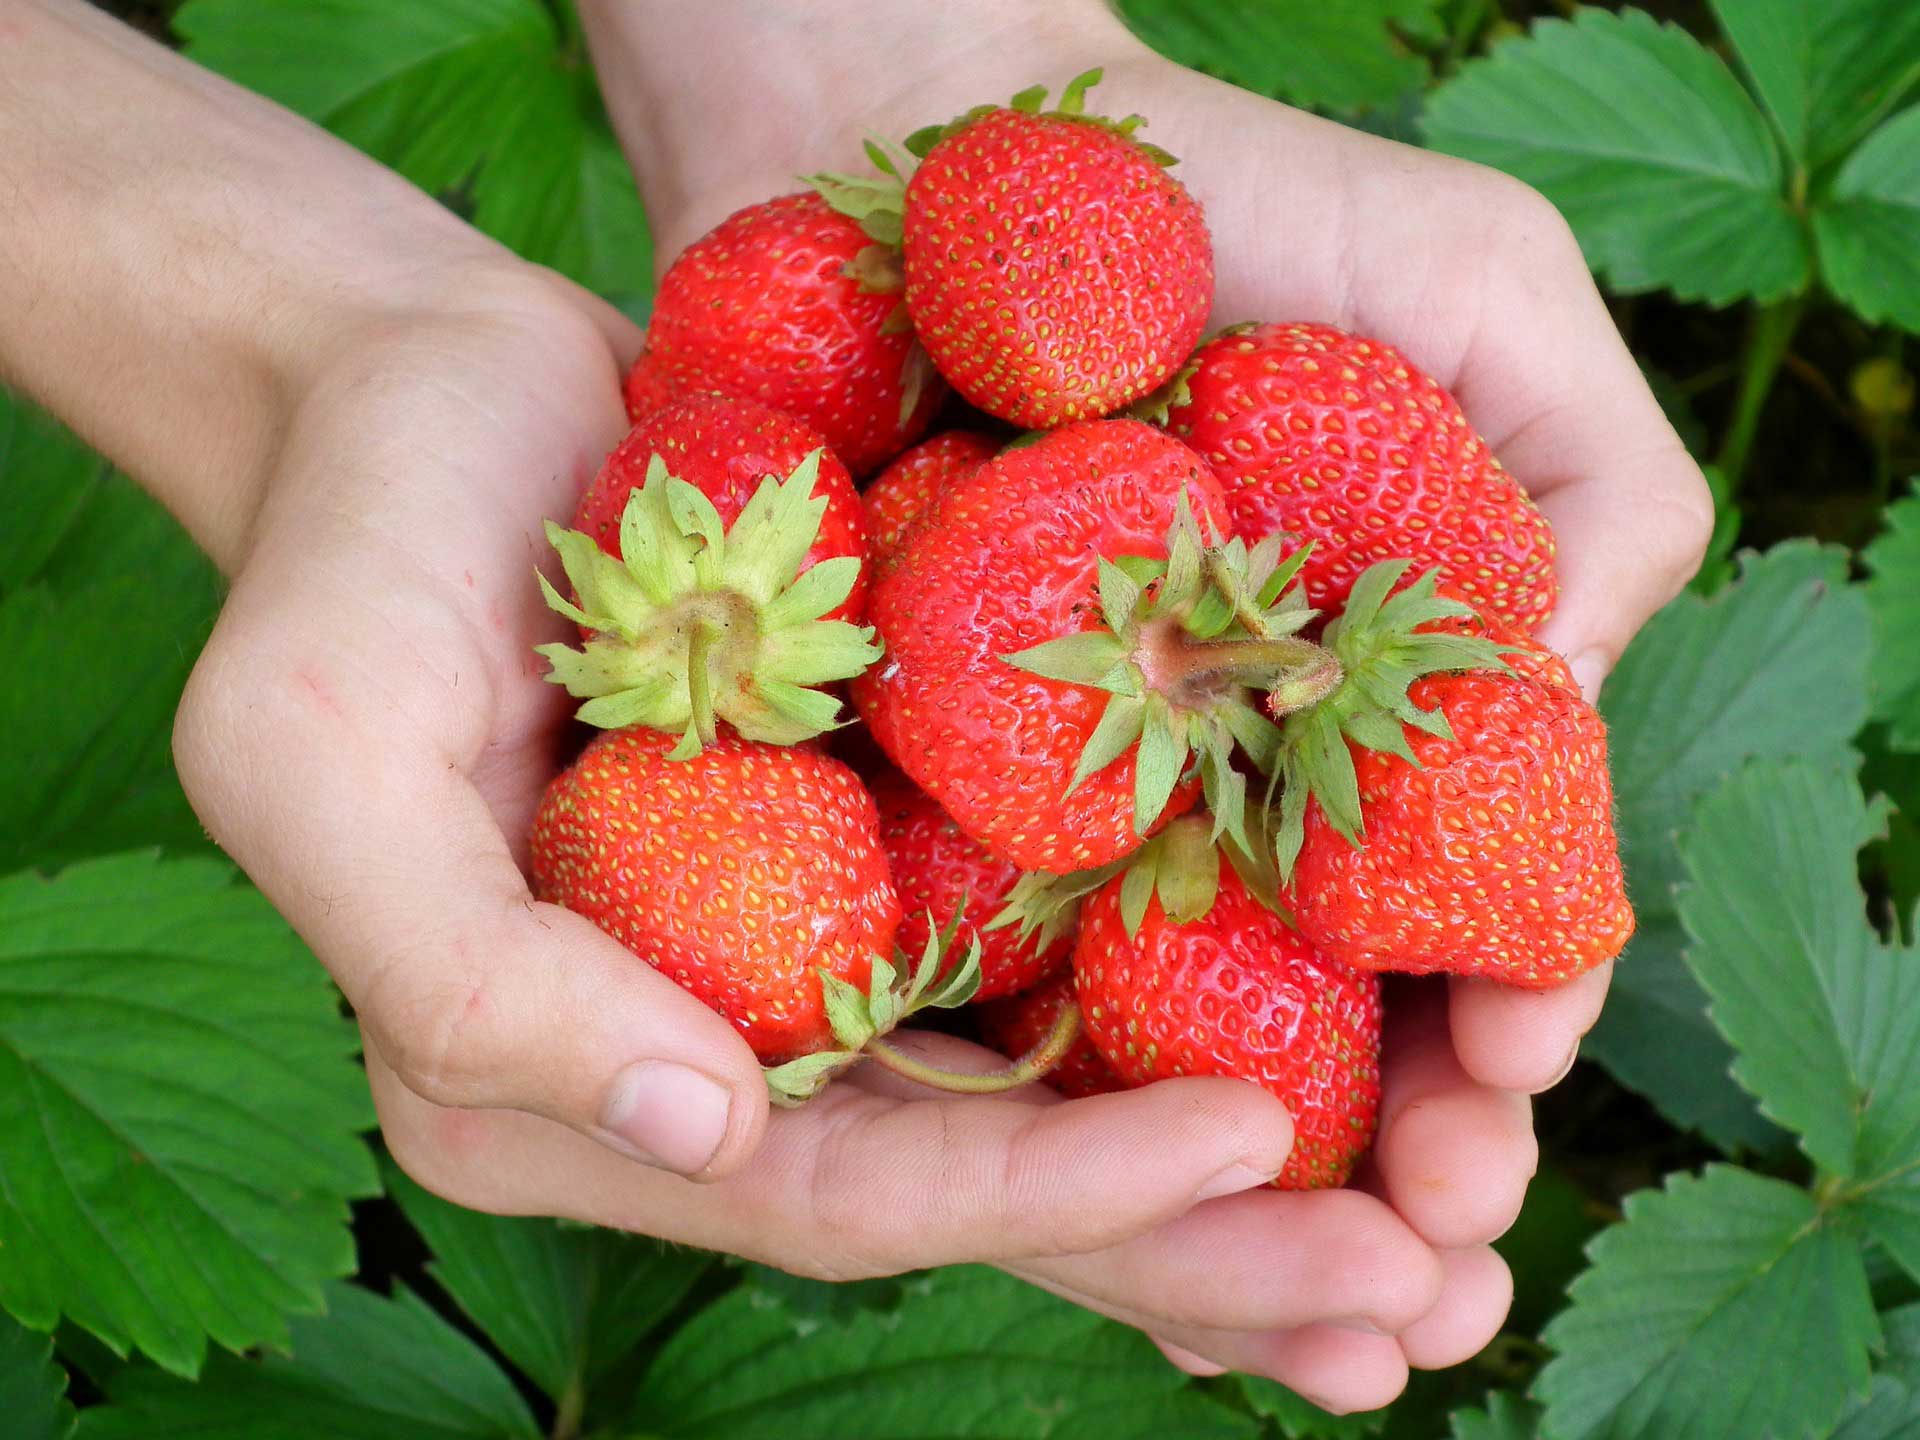 Strawberry cultivation